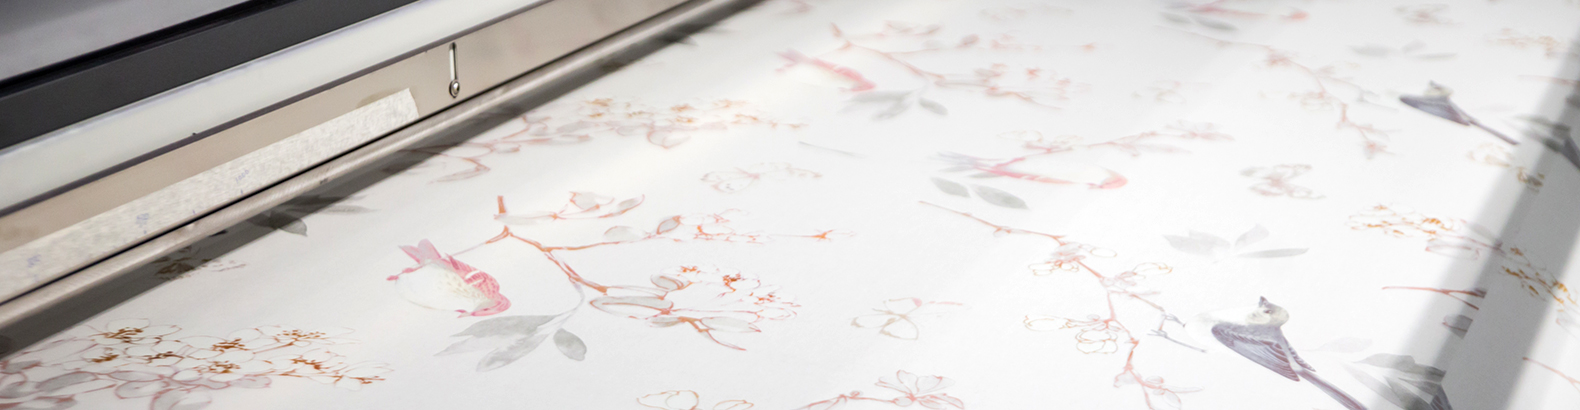 Digital textile printing gives new life to the French textile industry